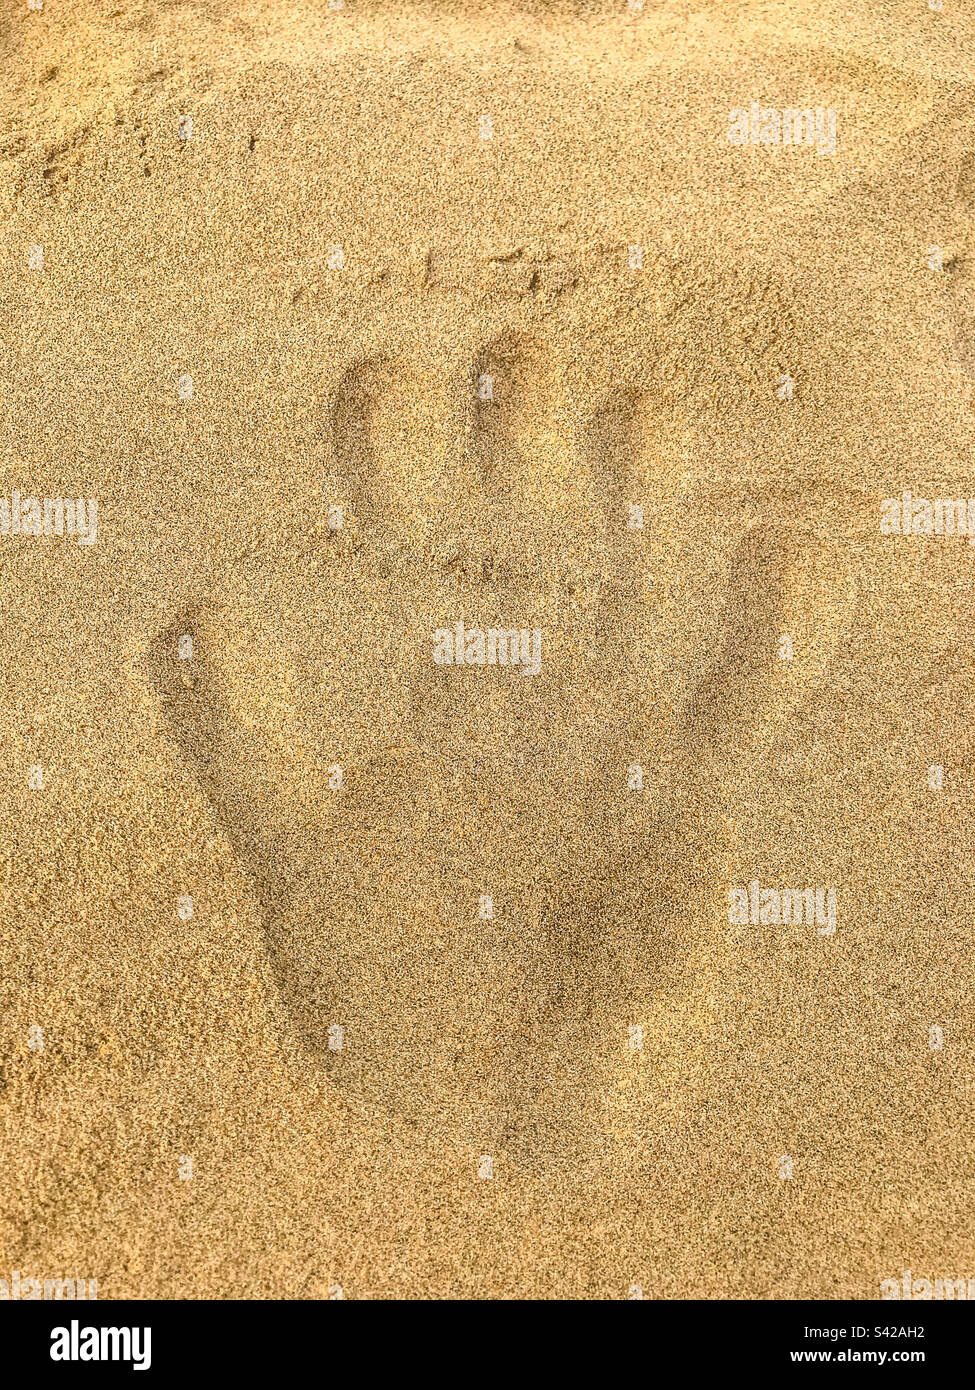 Hand print in the sand Stock Photo